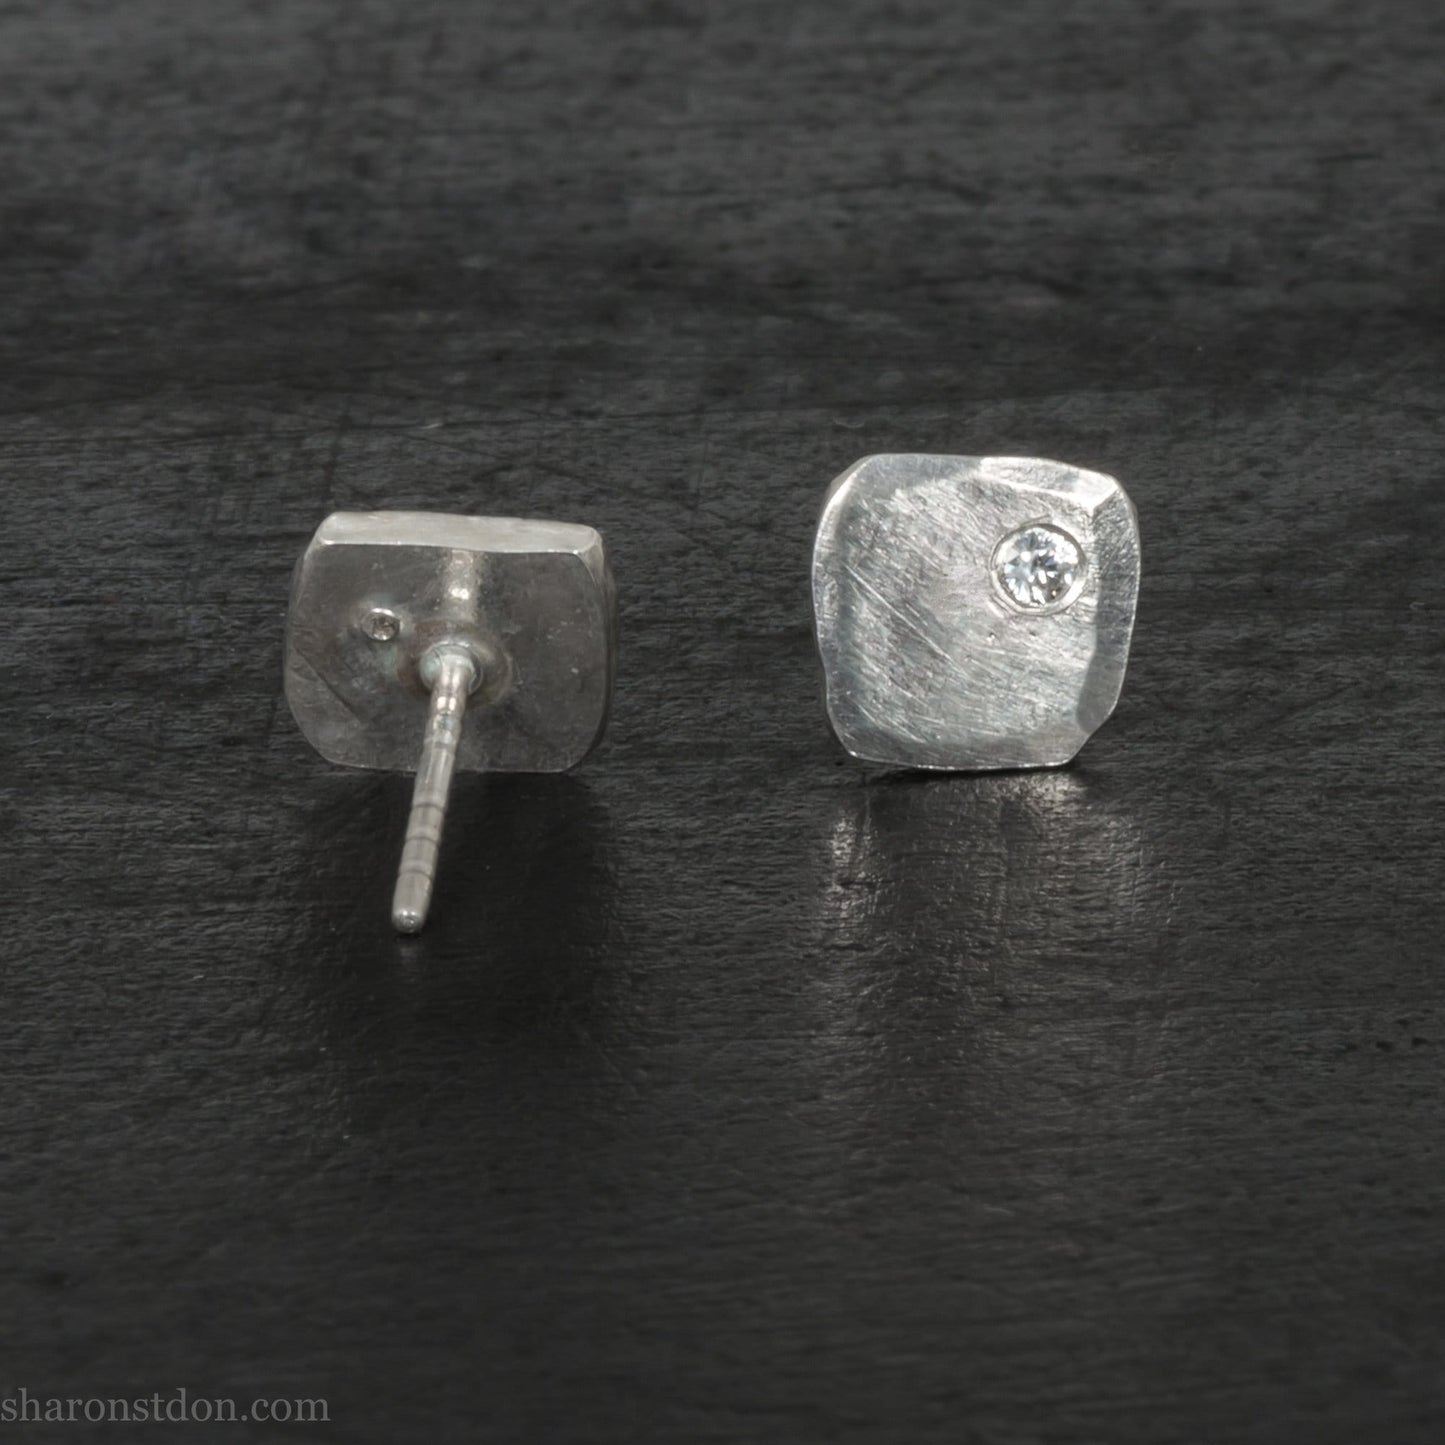 7mm square, handmade 925 sterling silver stud earrings with a Canadian diamond set in the corner. Handmade by Sharon SaintDon in North America with Canadamark diamonds.